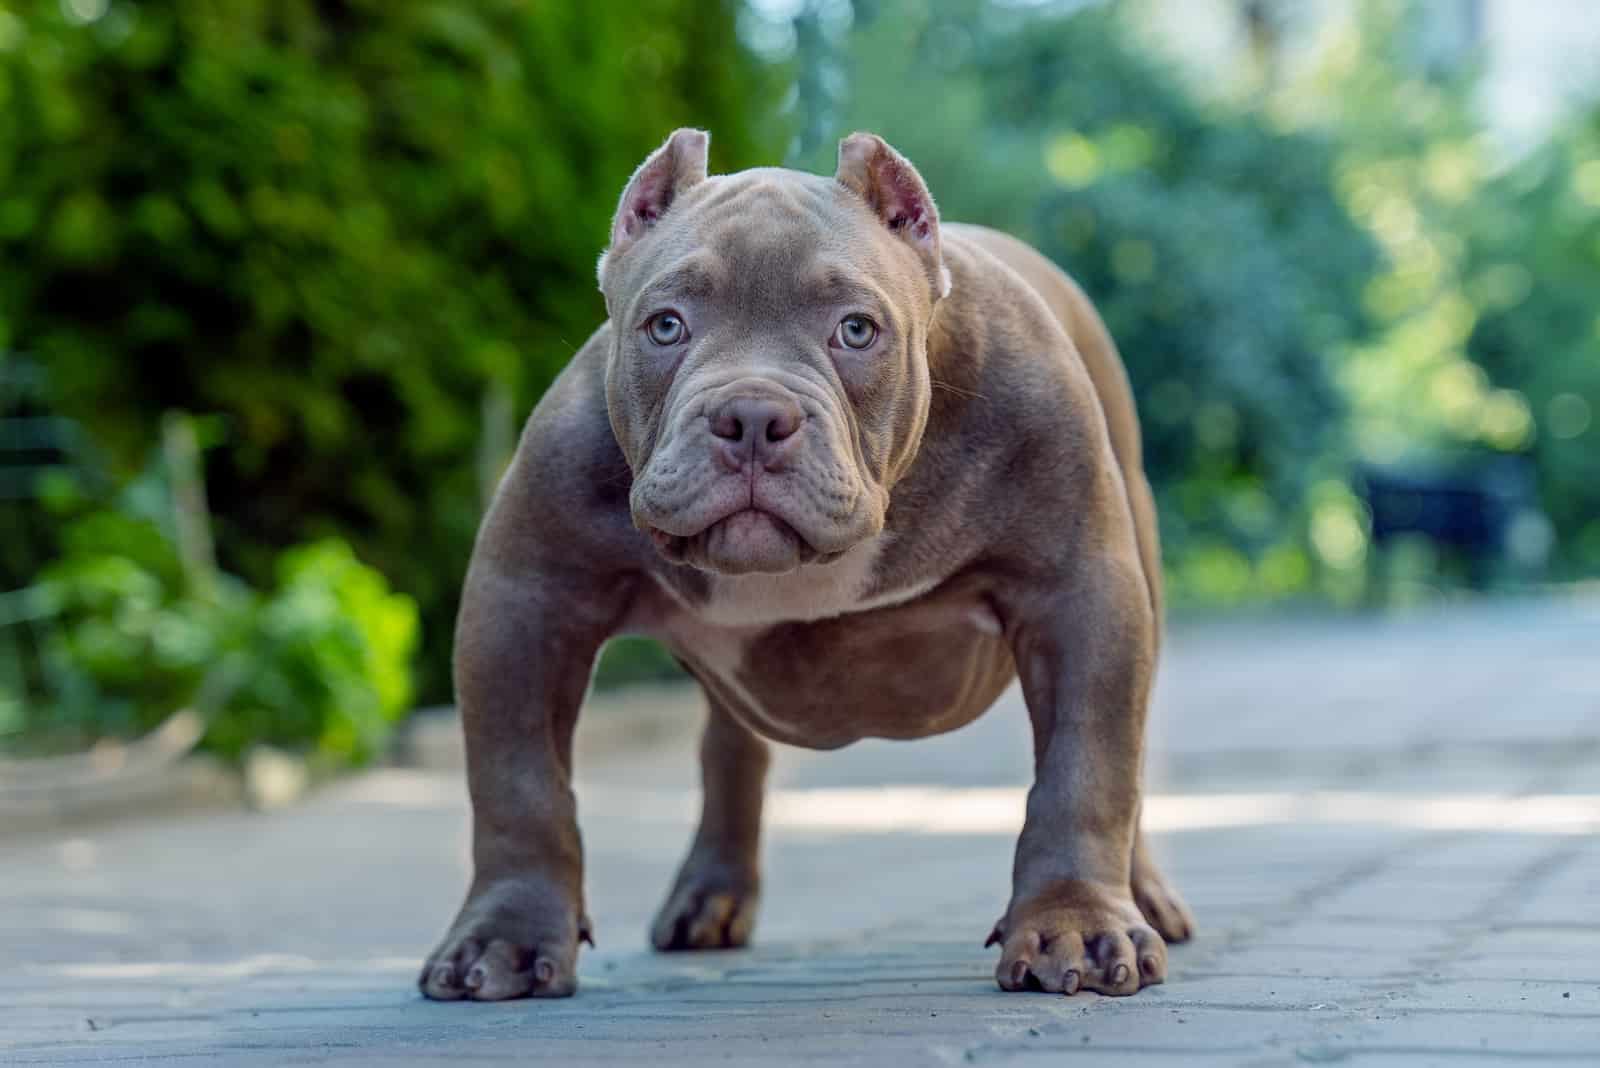 american bully how to breed